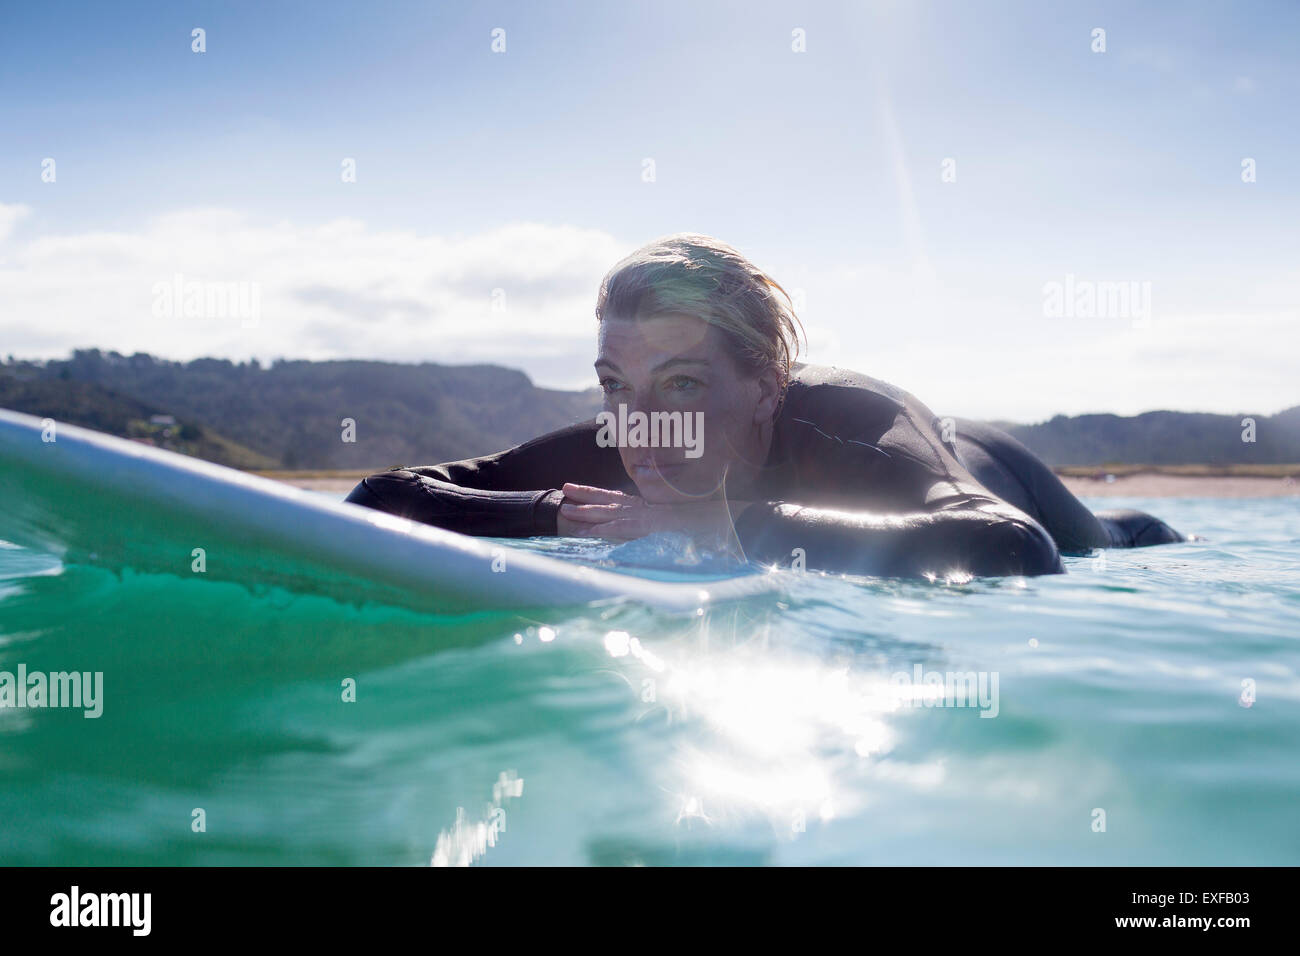 Surfer in the water, Bay of Islands, NZ Stock Photo